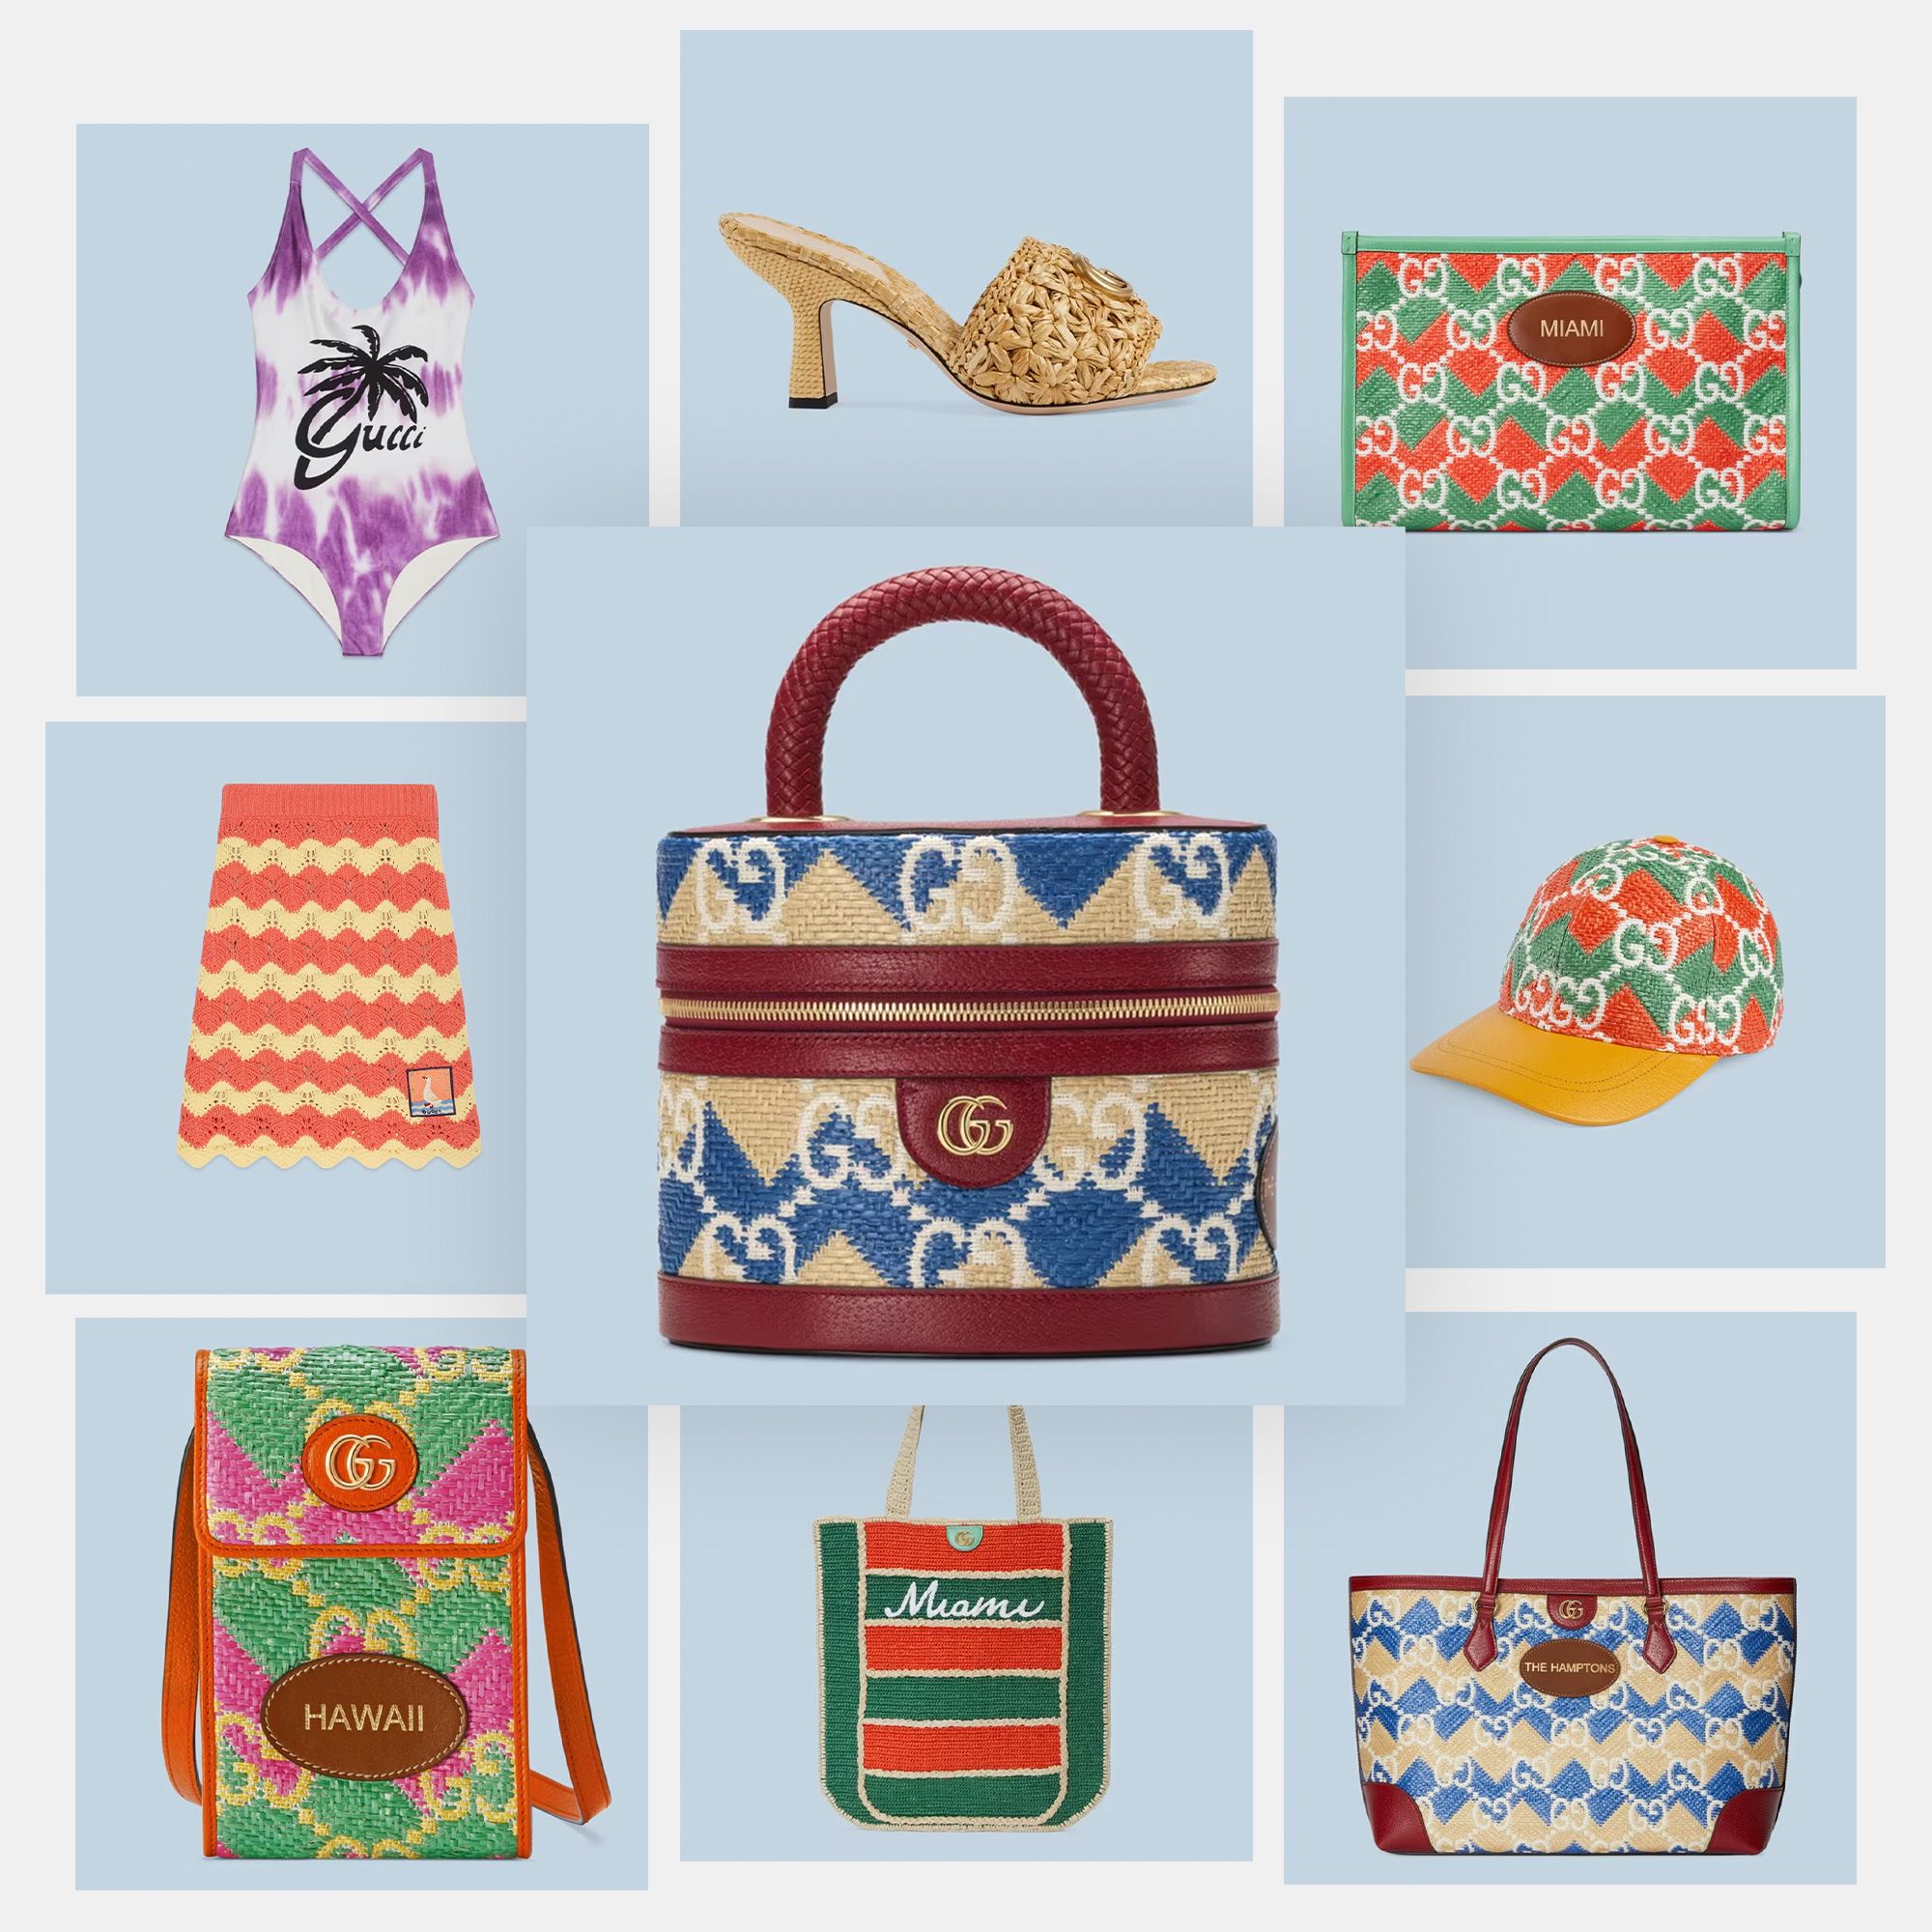 Gucci Made the Least Touristy Travel Accessories You've Seen